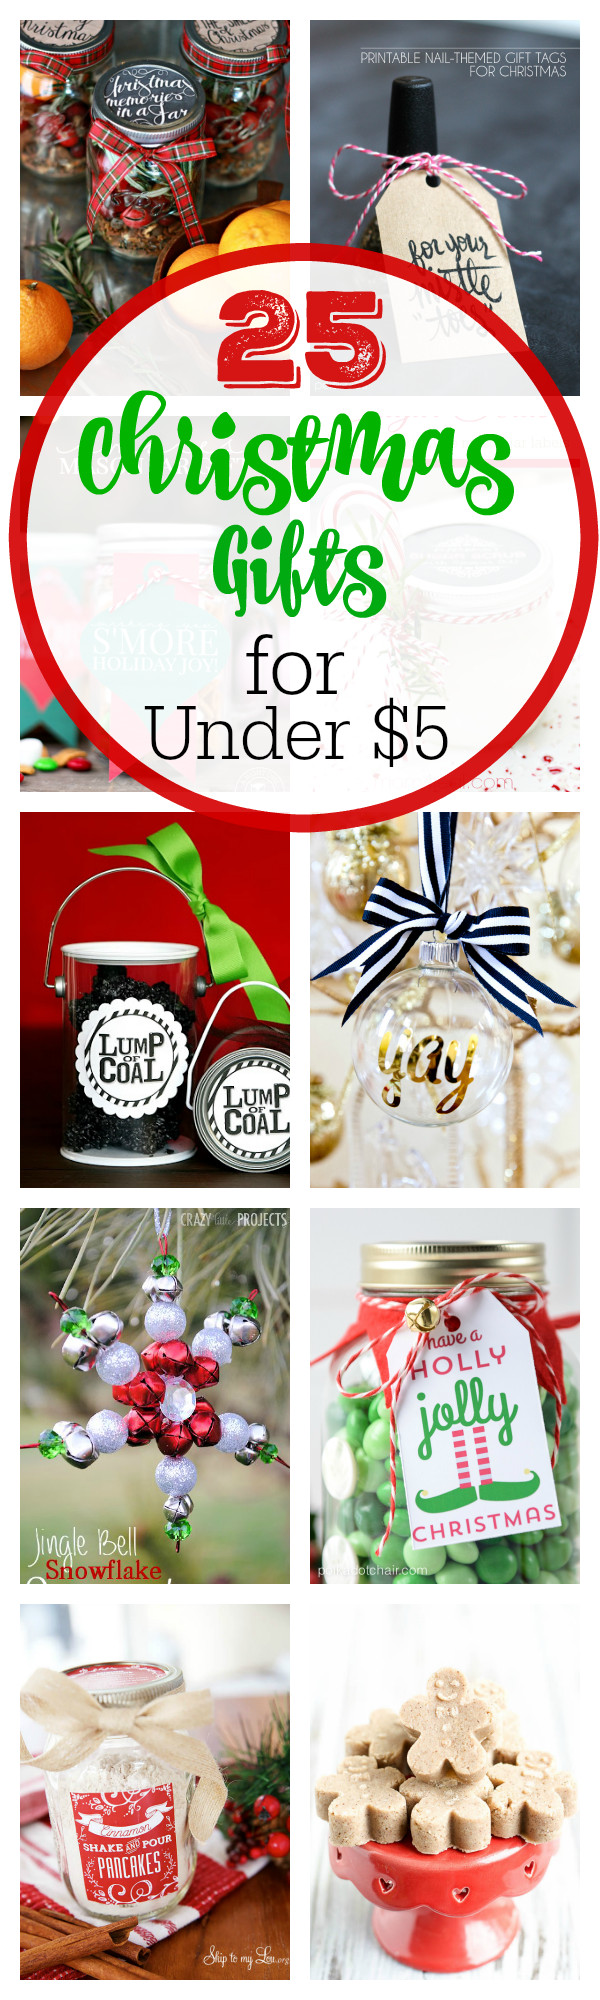 Christmas Gift Ideas For Coworkers Under $5
 25 Cheap Gifts for Christmas Under $5 Crazy Little Projects